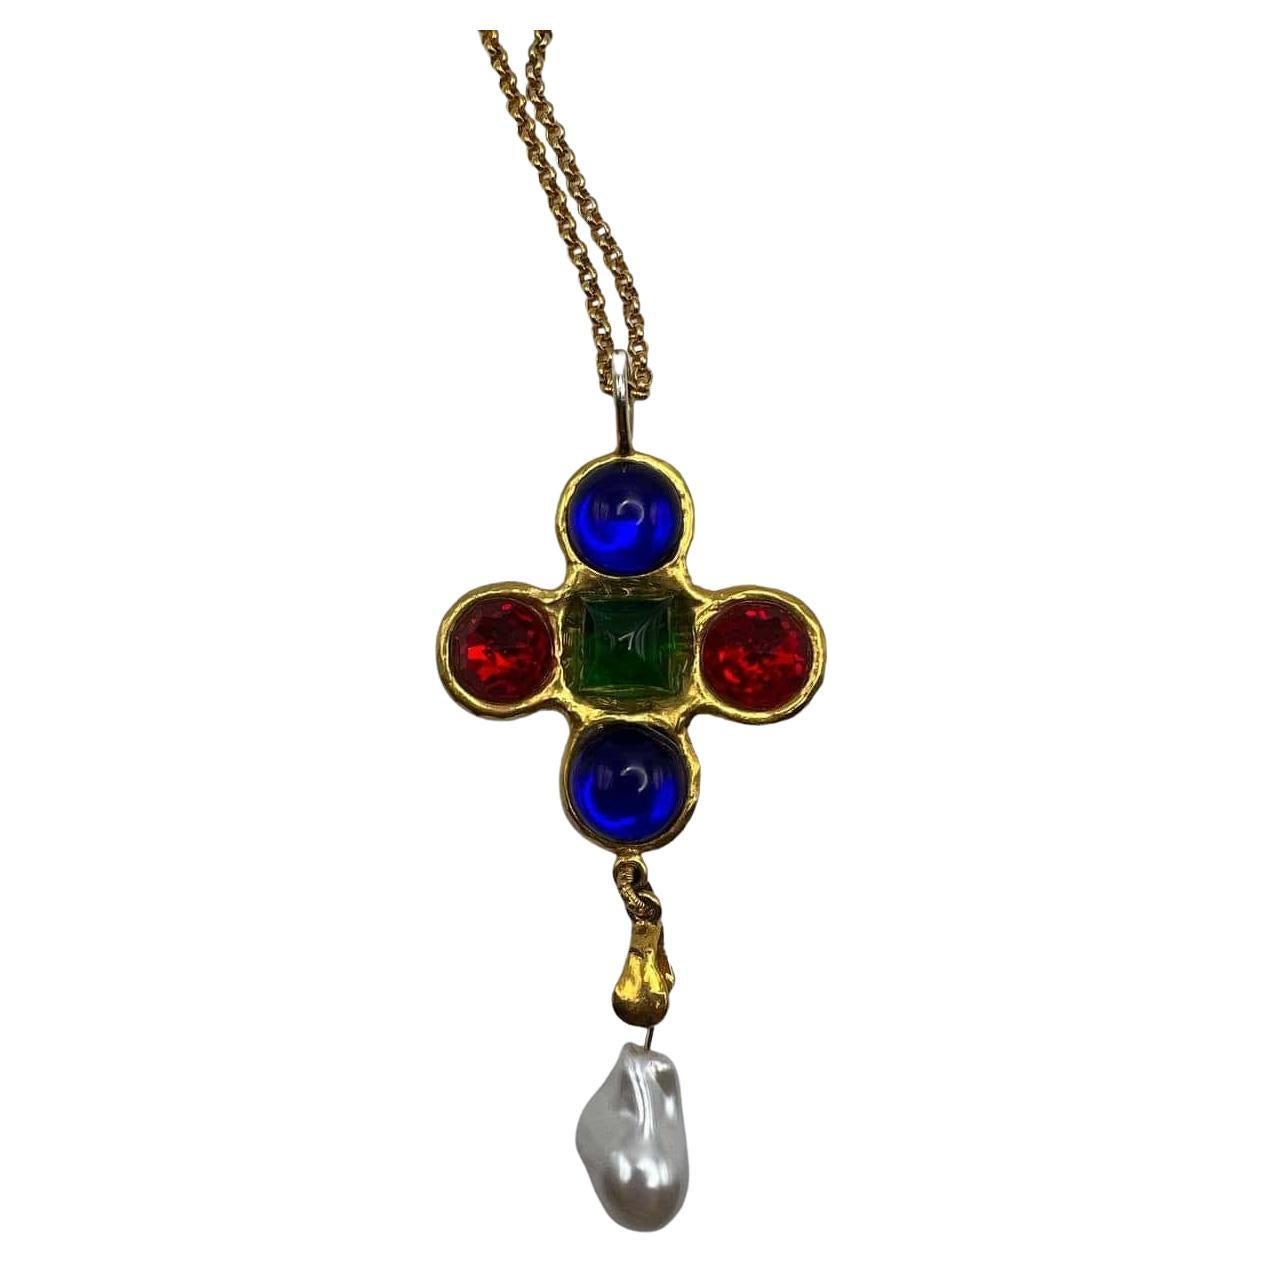 Vintage Byzantine style Yves Saint Laurent cross pendant with cabochons, 1980s